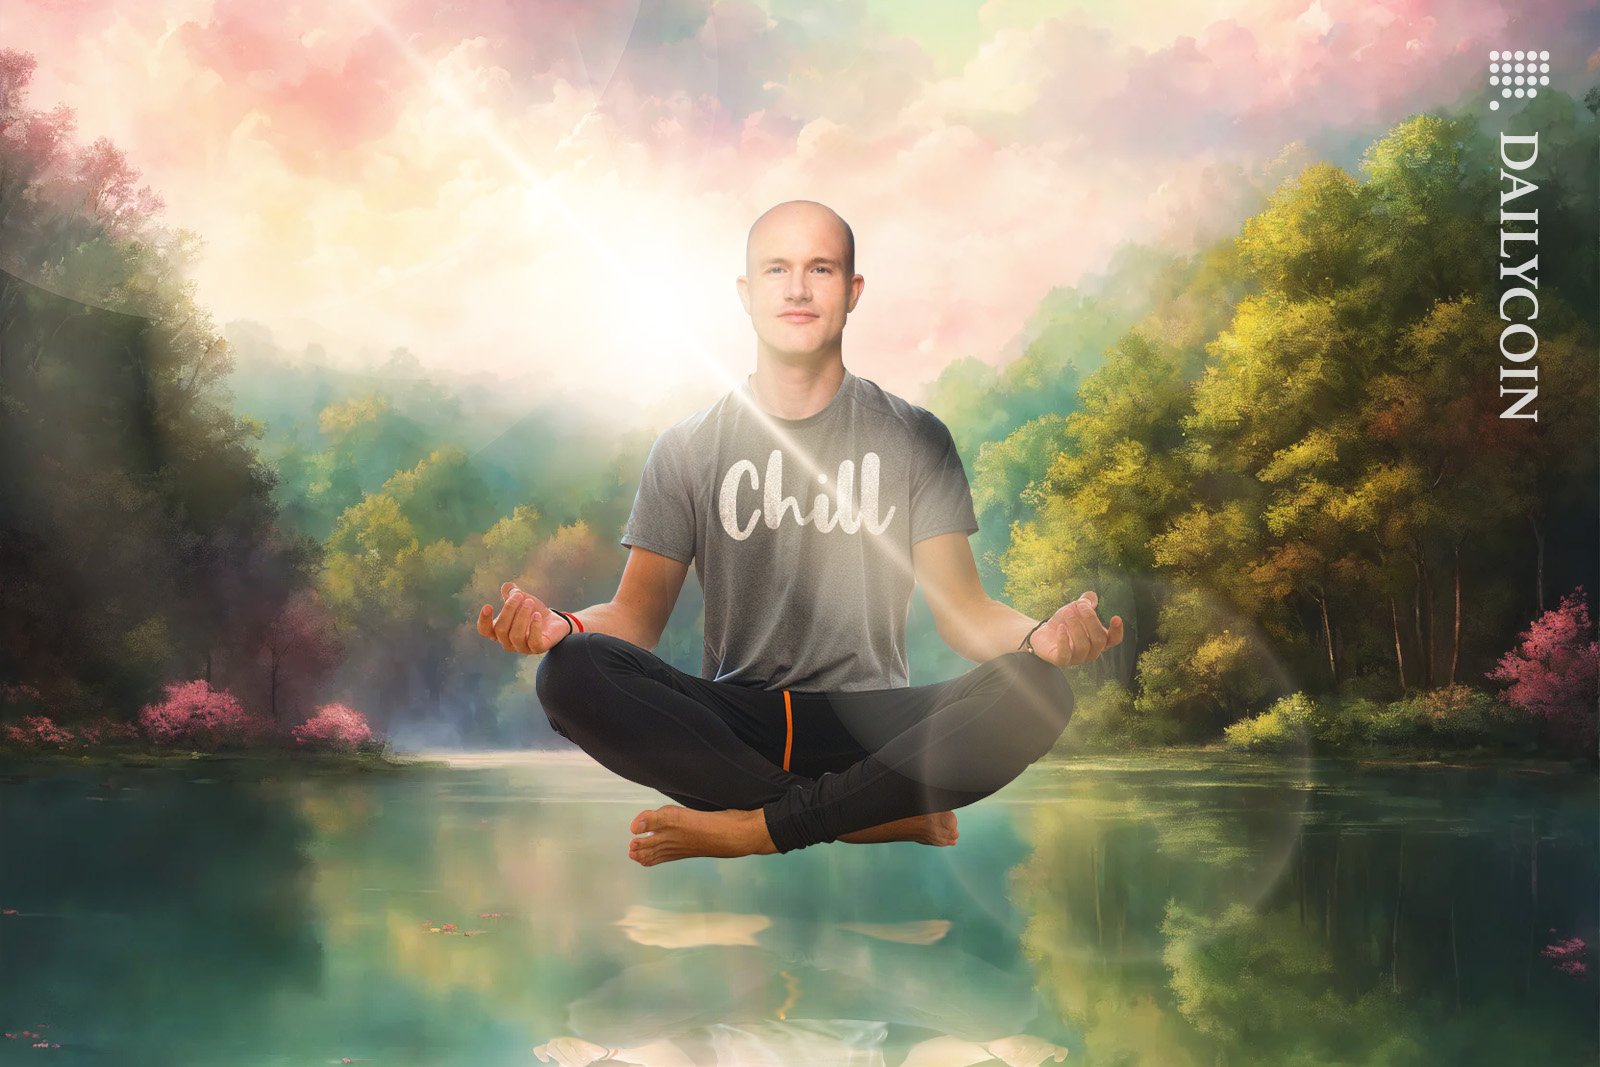 Brian Armstrong levitating above a tranquille forest lake wearing a "Chill" T-shirt.